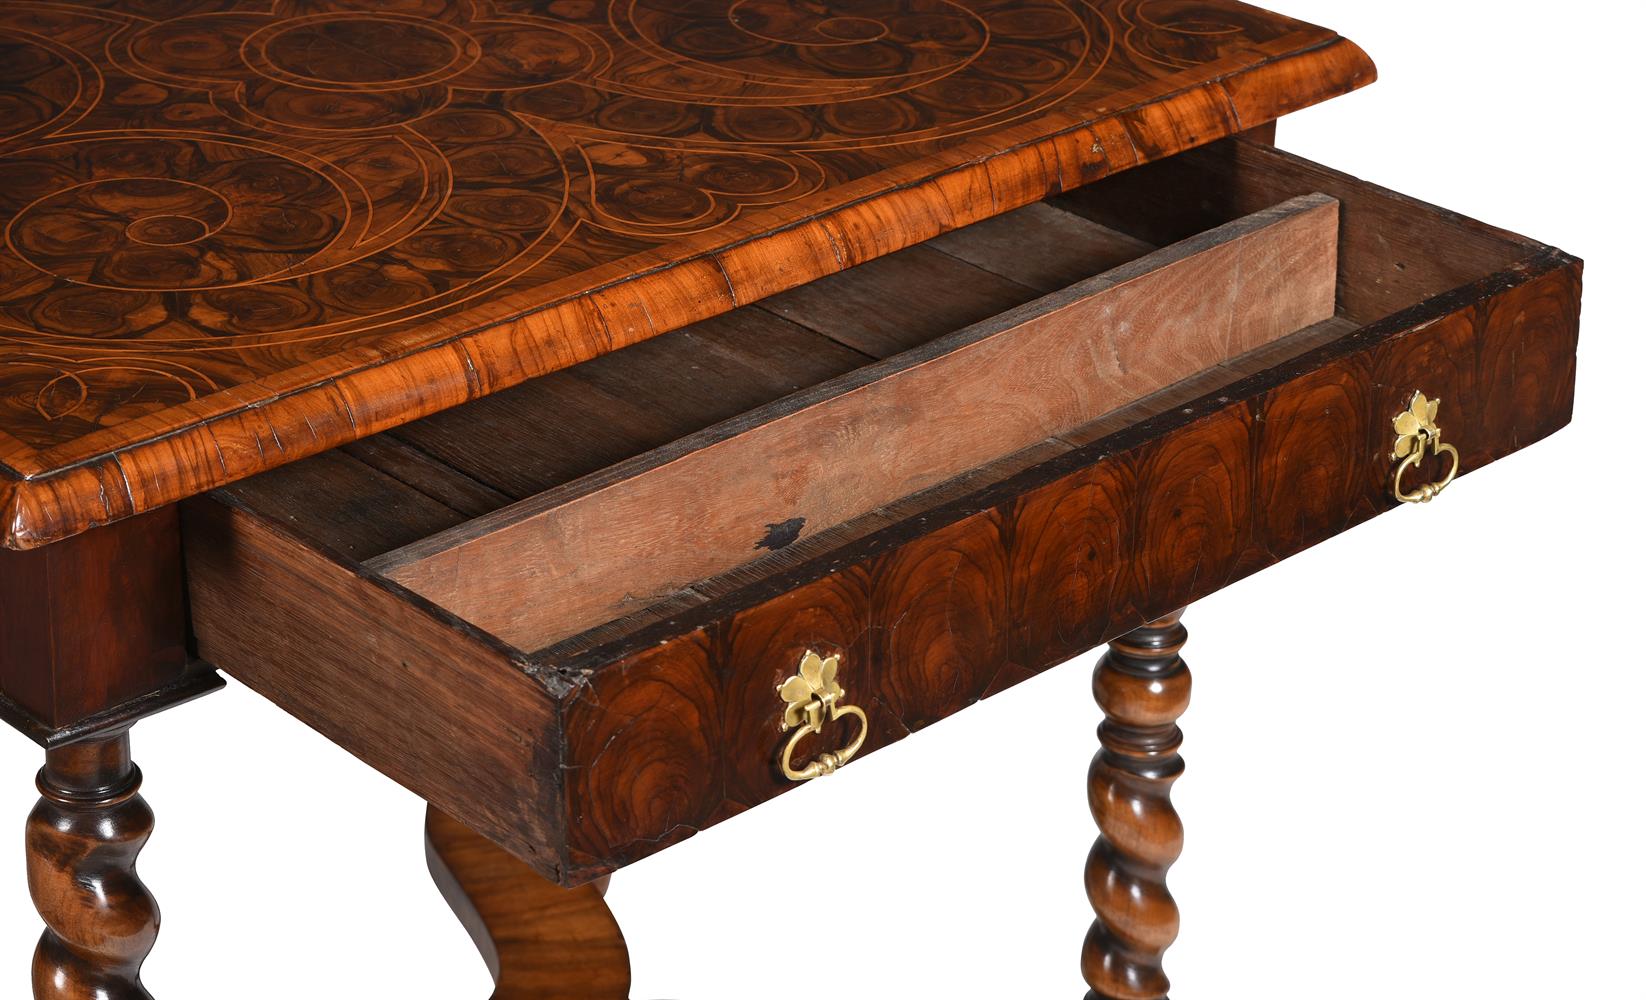 AN OLIVEWOOD AND HOLLY OYSTER VENEERED SIDE TABLE, CIRCA 1680 & LATER - Image 6 of 7